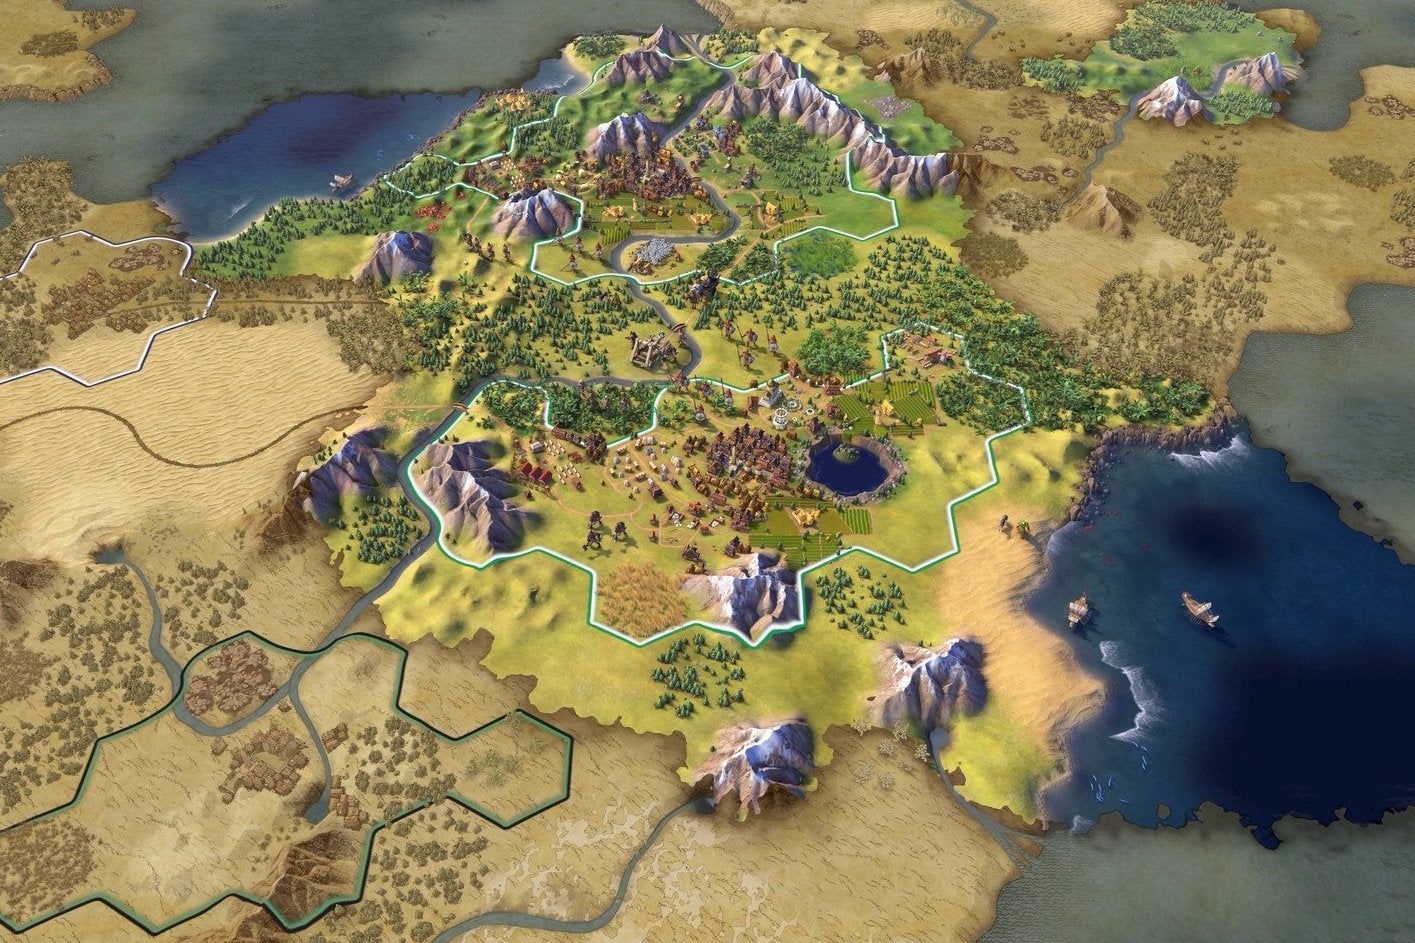 Image for Civilization 6 strategies - How to master the early game, mid-game and late game phases